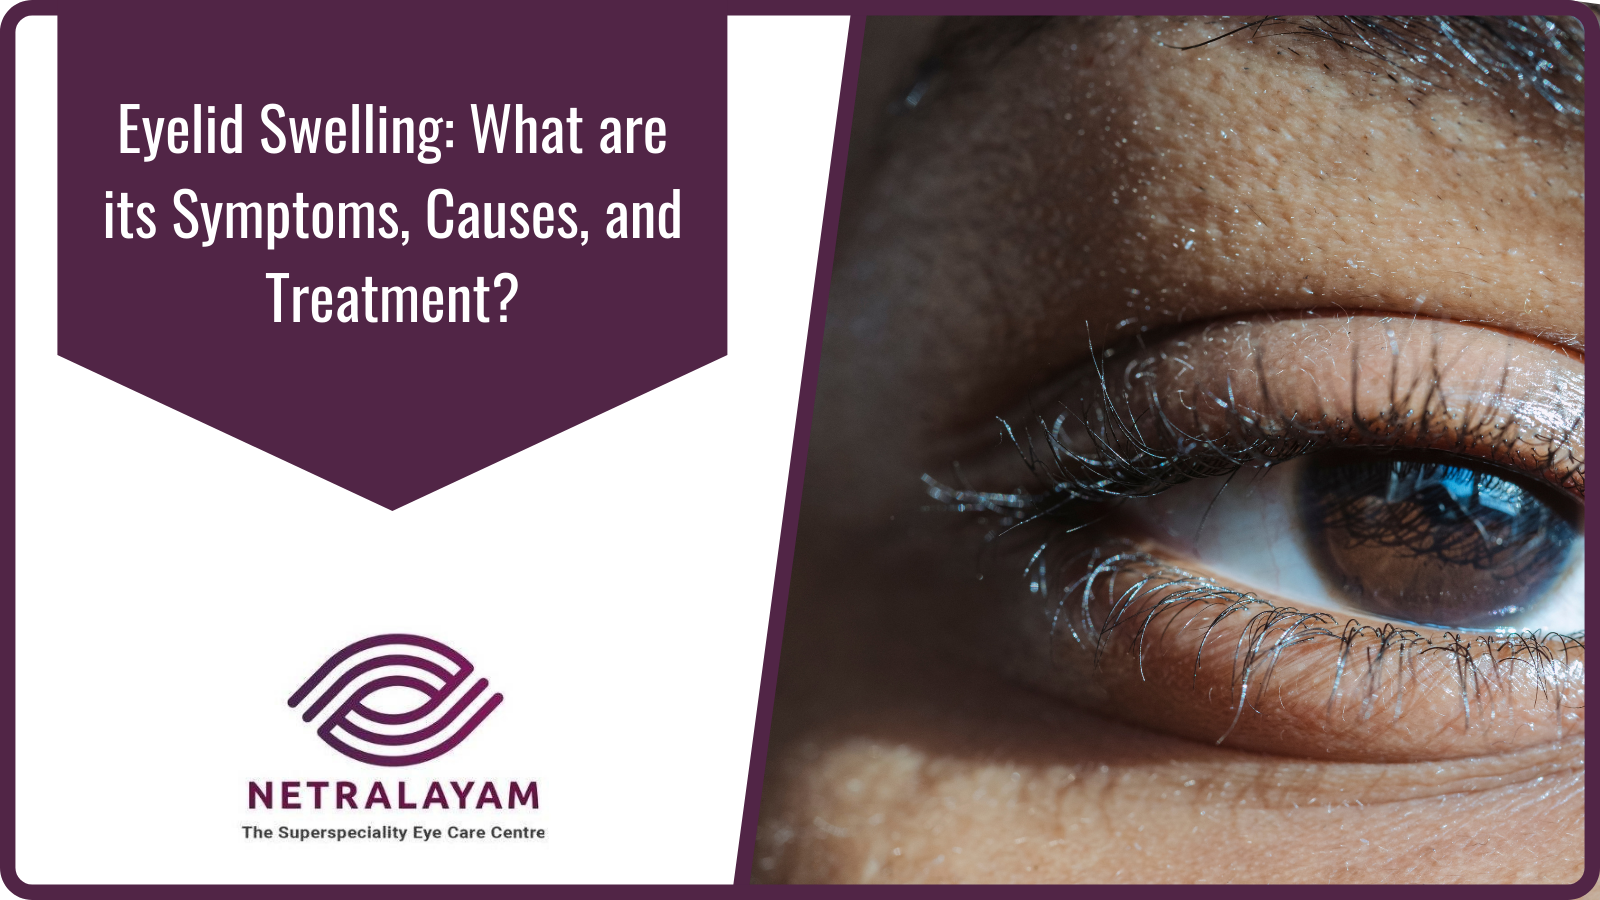 Eyelid Swelling: What are its Symptoms, Causes, and Treatment?